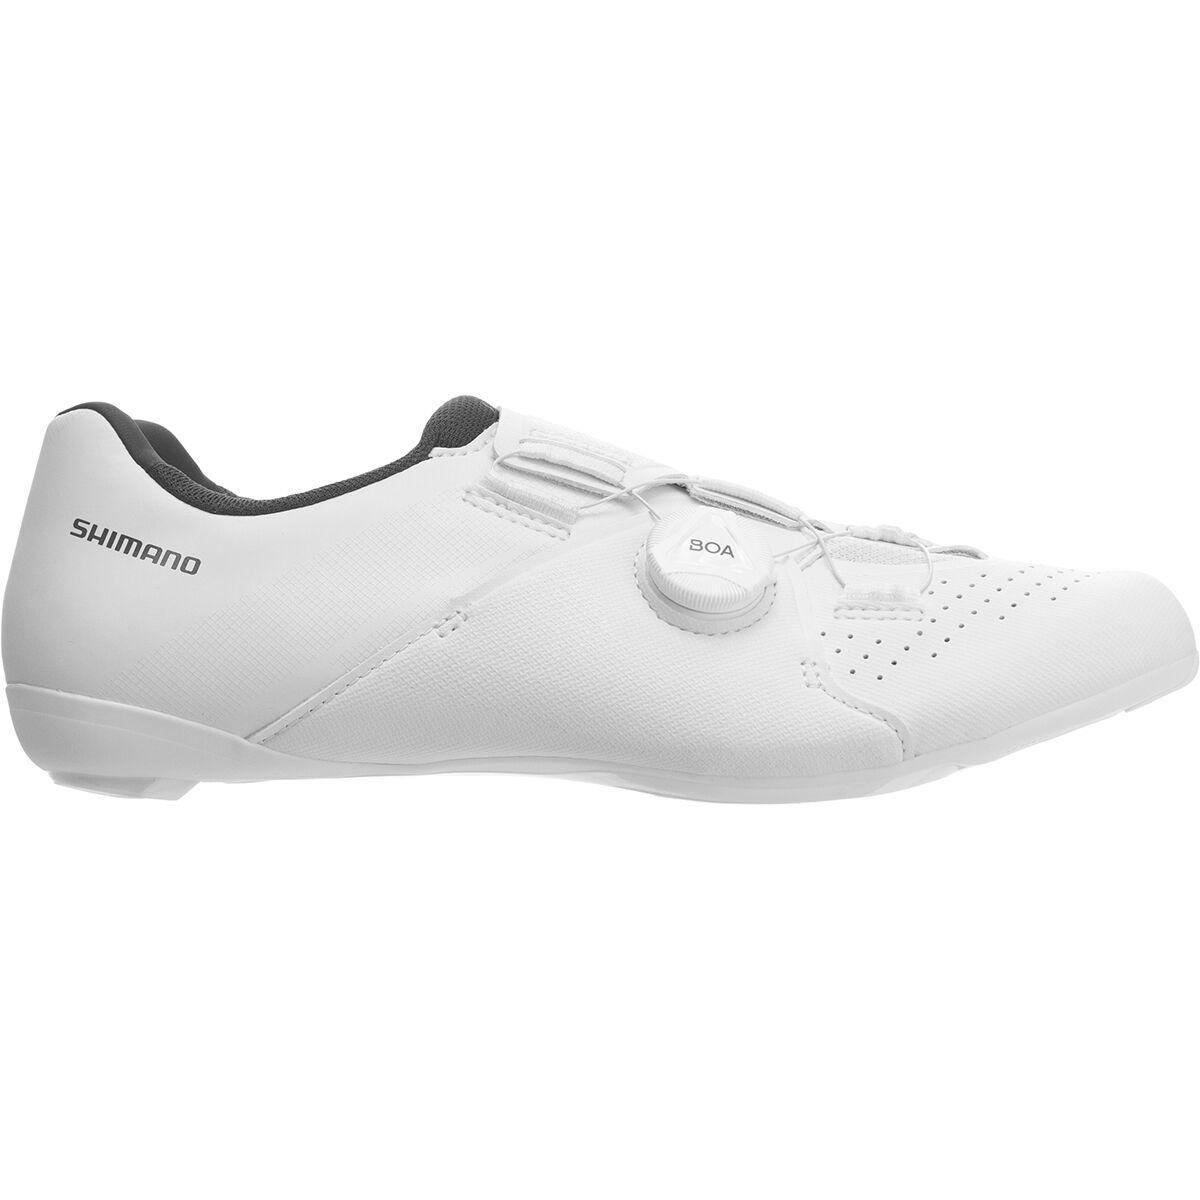 Shimano RC300 Limited Edition Cycling Shoe - Women's product image